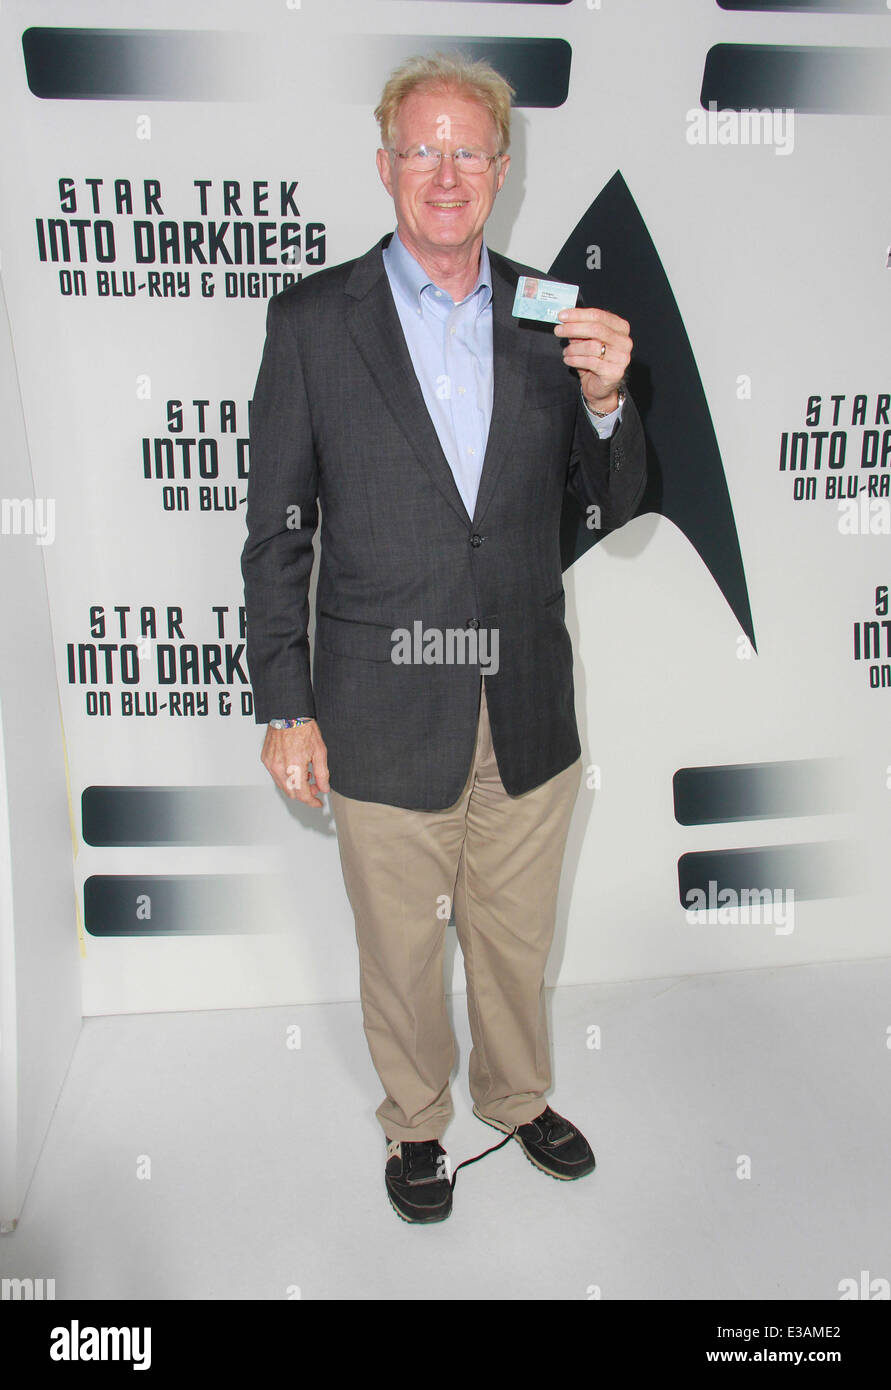 Paramount Pictures Celebrates The Blu-ray And DVD Debut Of 'Star Trek: Into Darkness' Held at California Science Center  Featuring: Ed Begley Jr. Where: Los Angeles, California, United States When: 11 Sep 2013 Stock Photo